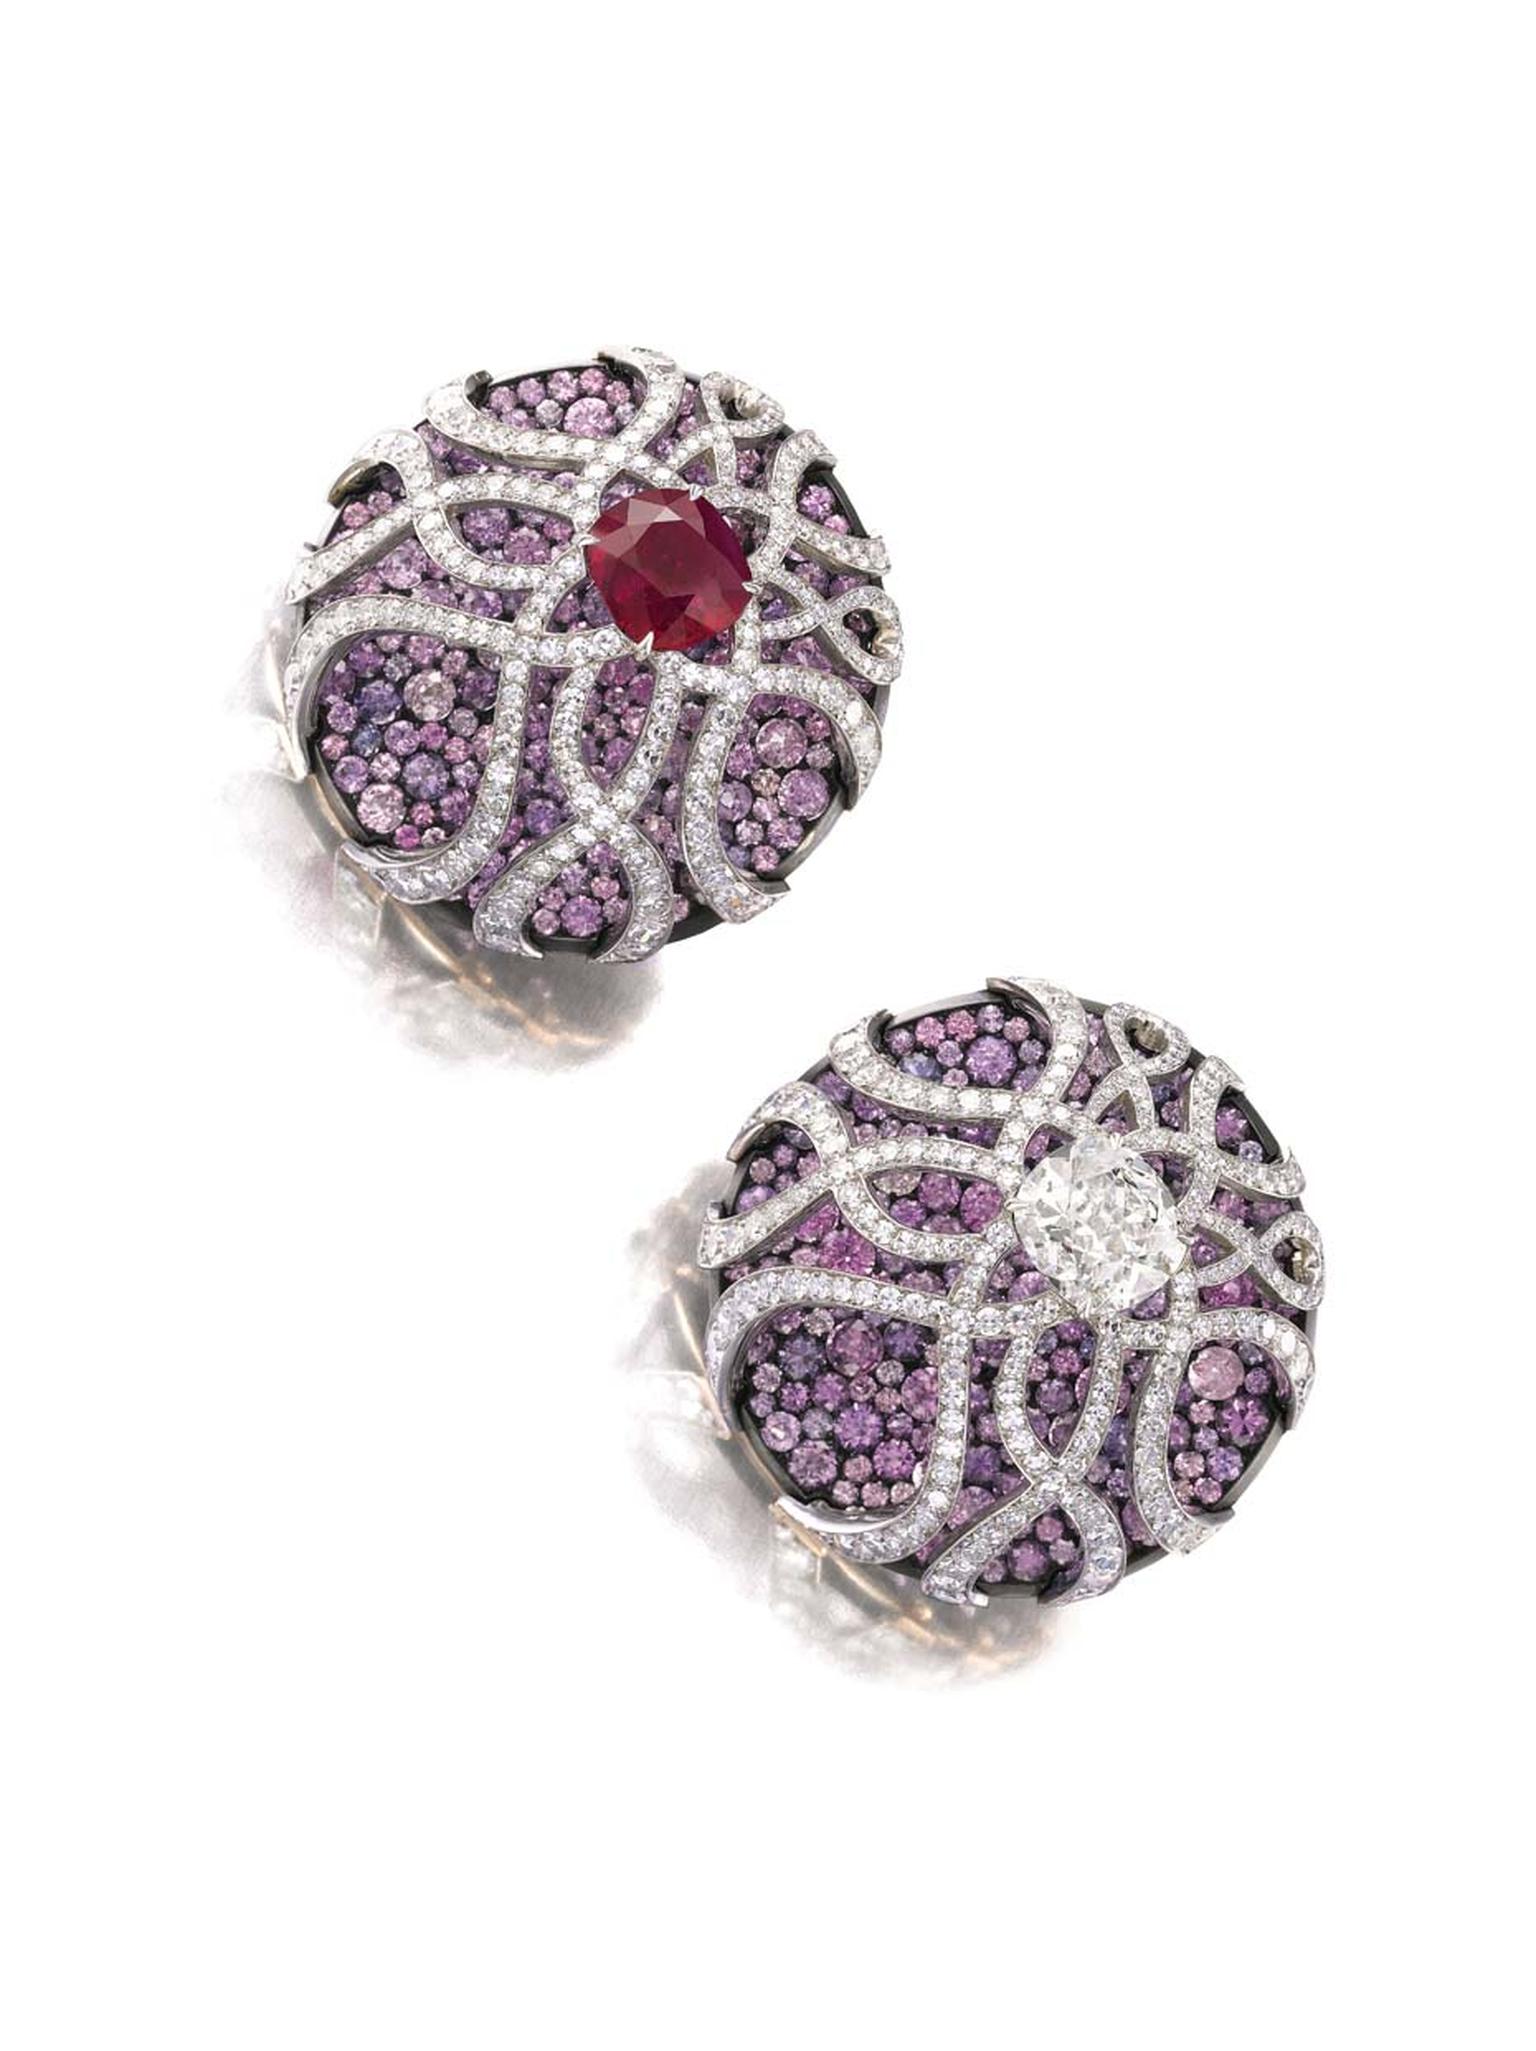 Sapphire, ruby and diamond earrings by JAR from Dimitri Mavrommatis’ private collection to be auctioned by Sotheby’s Geneva this November (estimate: US$400,000-700,000).